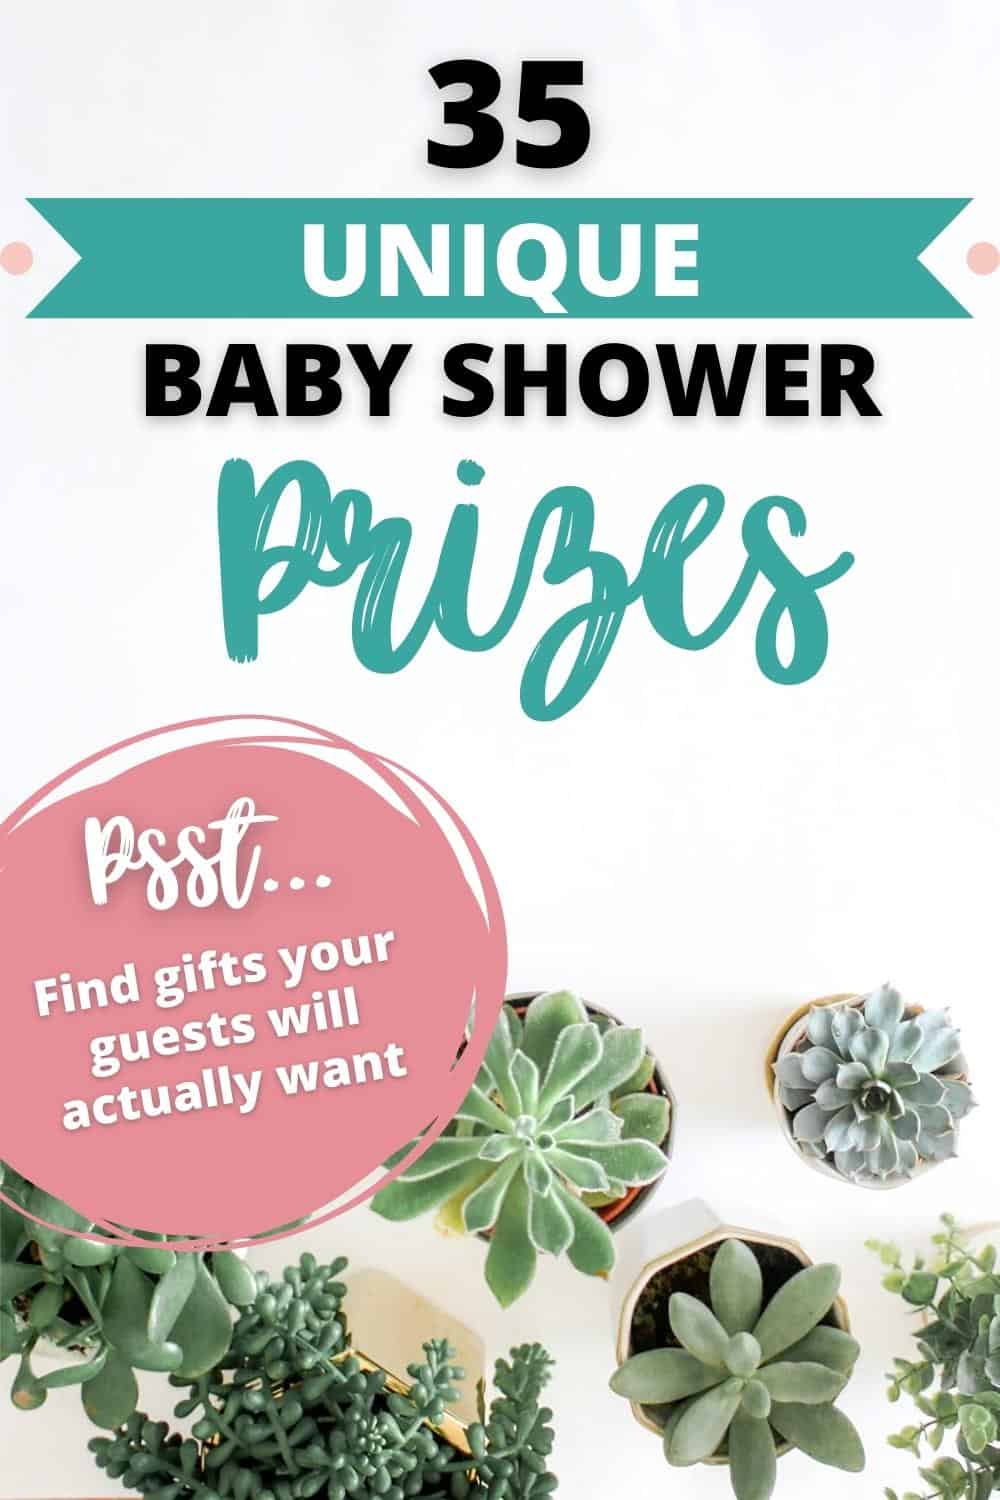 35 unique baby shower prizes psst. find gifts your guests actually want